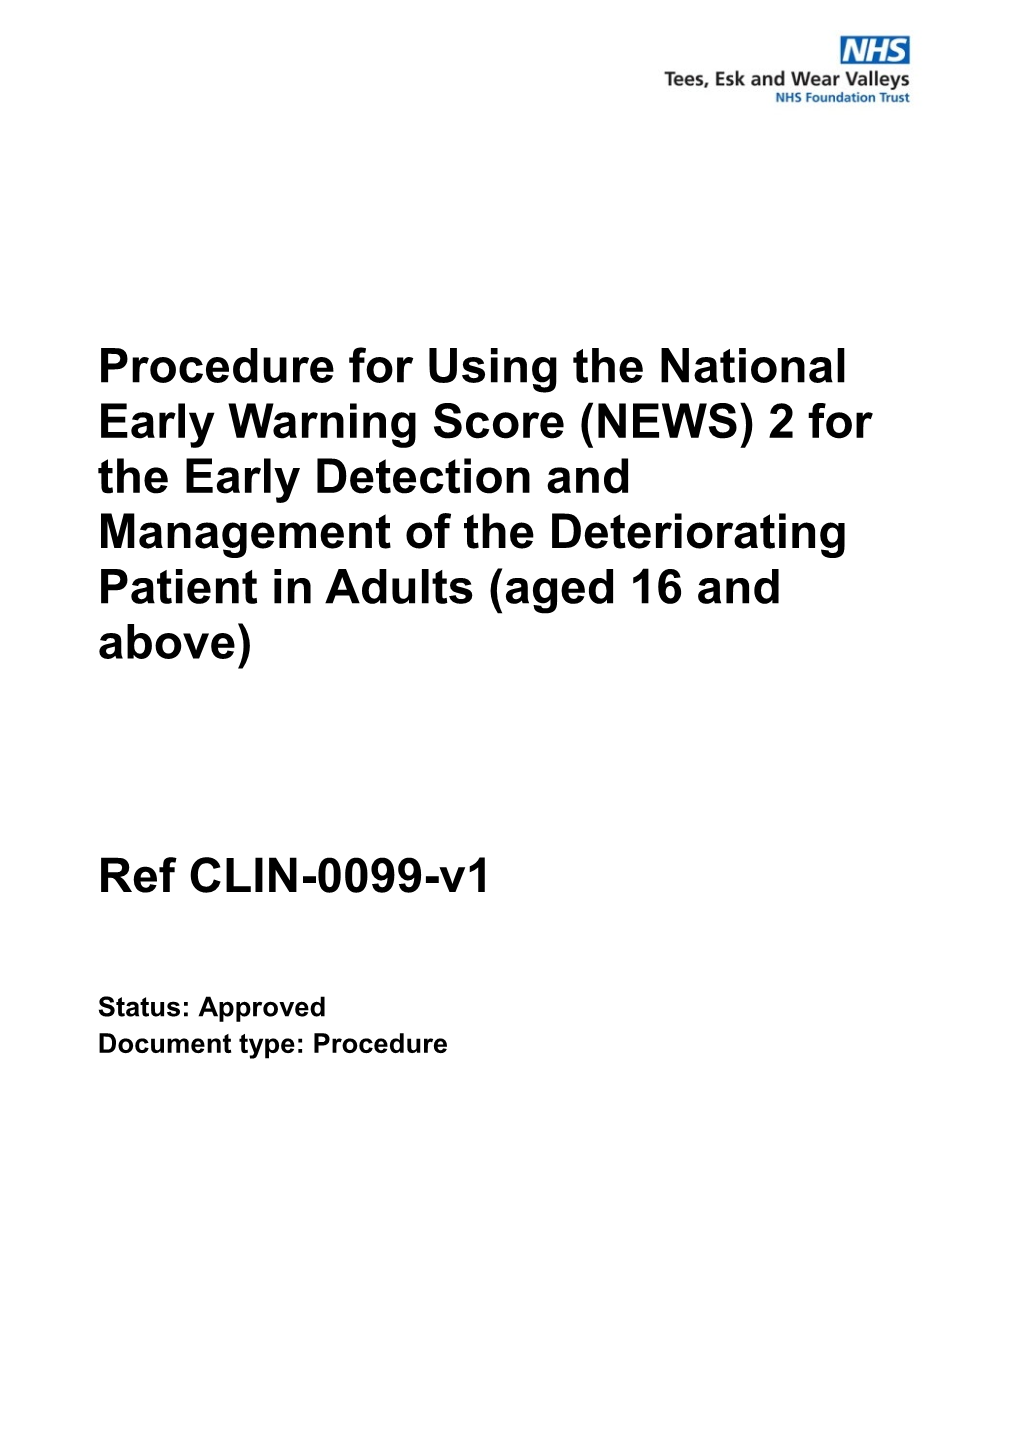 Procedure for Using the National Early Warning Score (NEWS) 2 for the Early Detection and Management of the Deteriorating Patient in Adults (Aged 16 and Above)